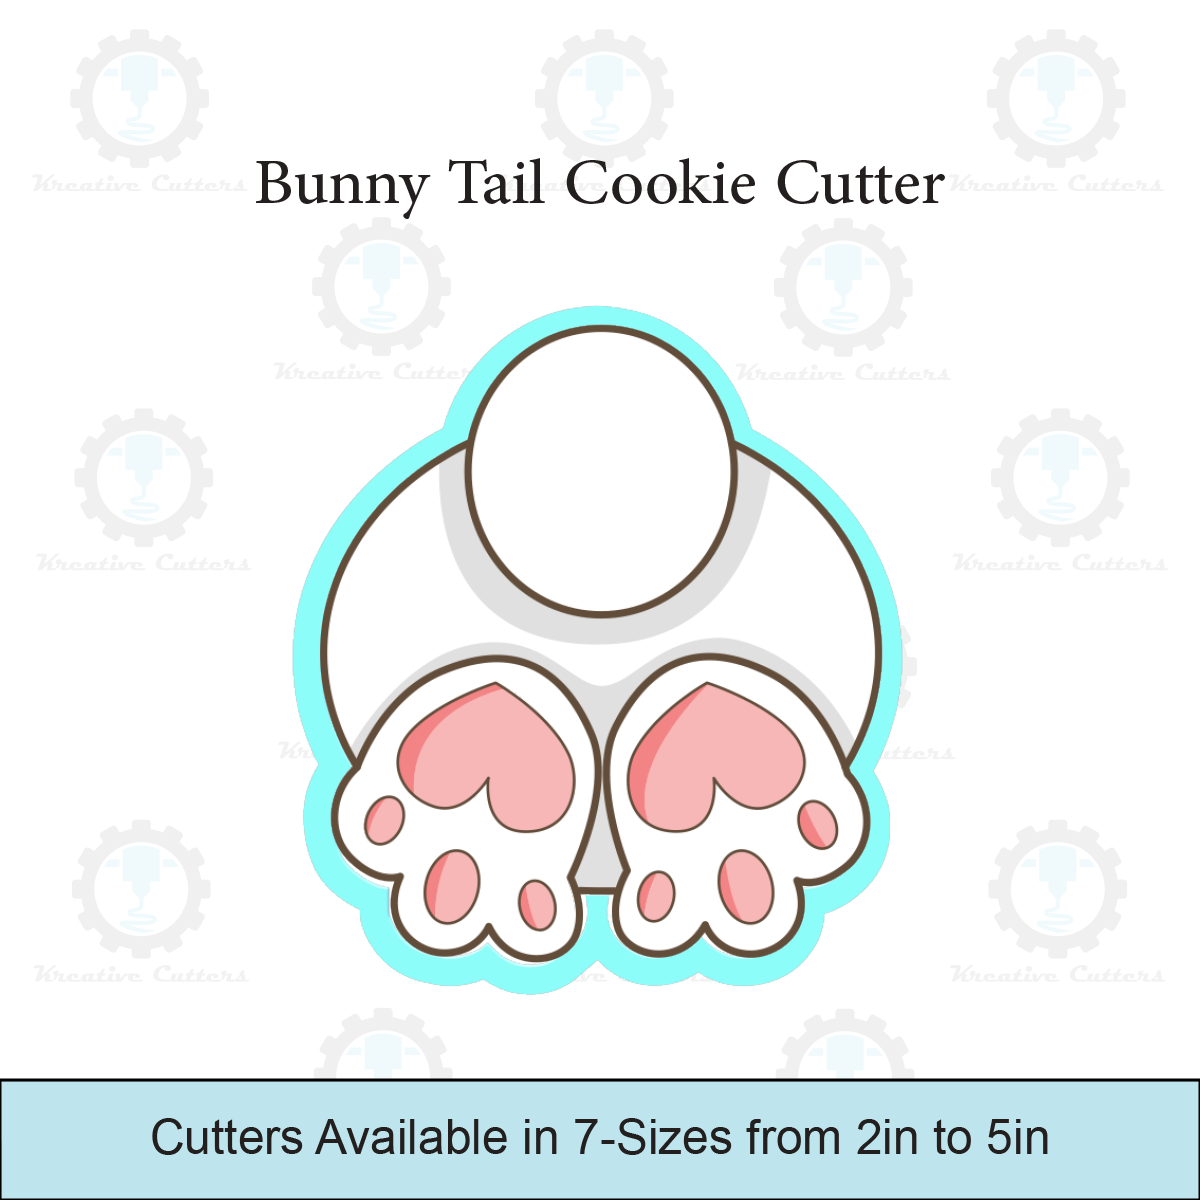 Bunny Tail Cookie Cutter